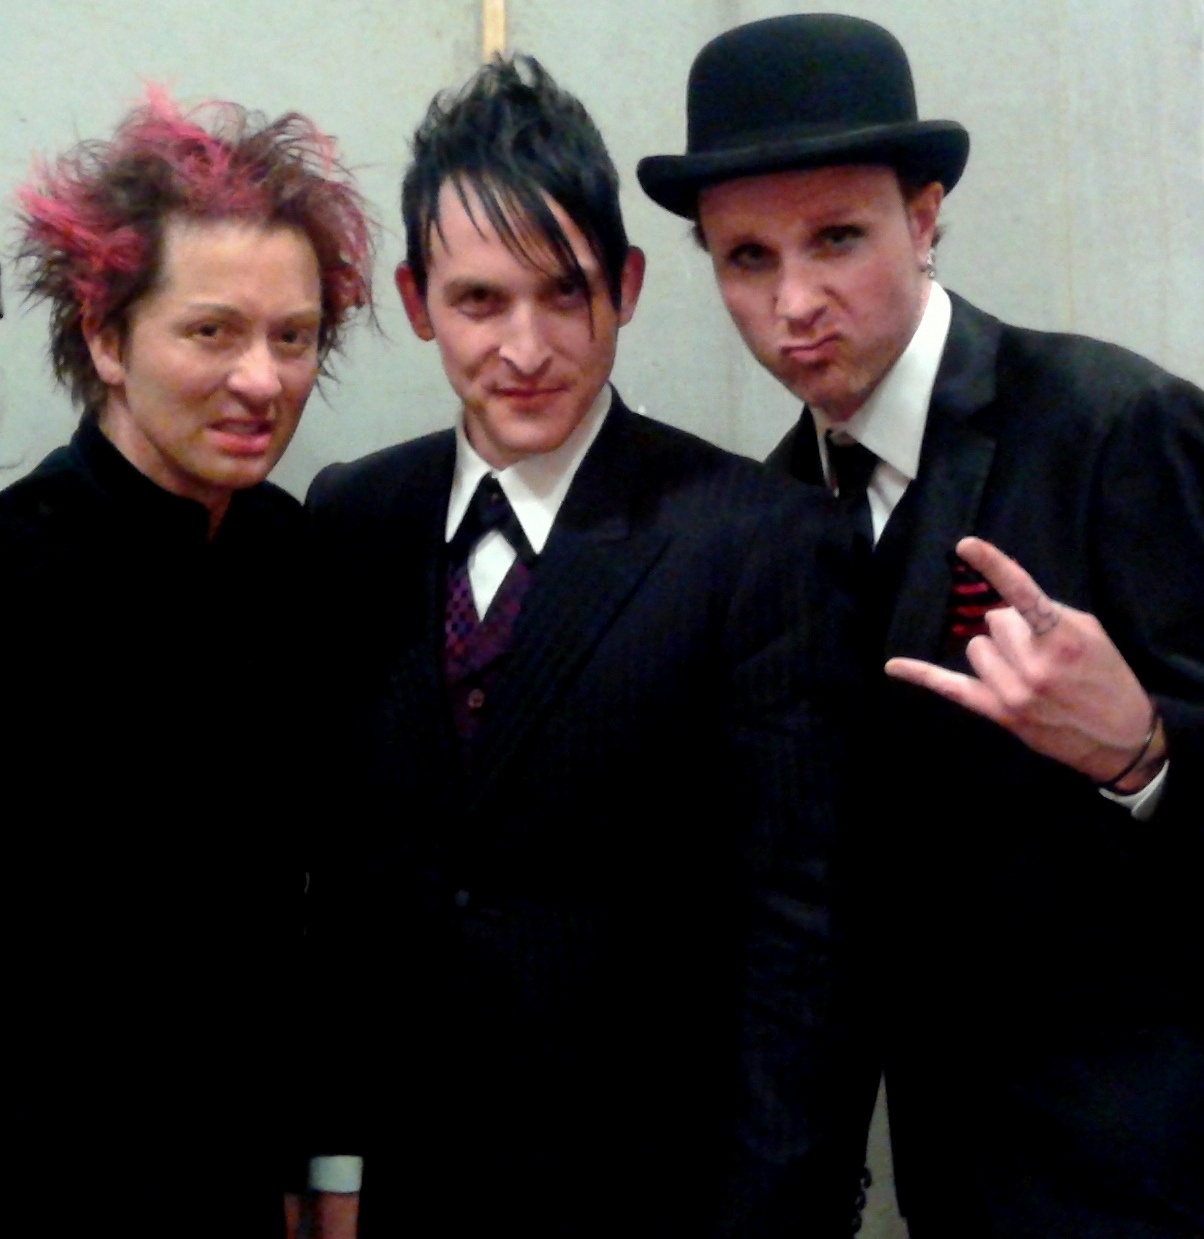 Actors Johnny Alonso (Kazz the bass player), Robin Lord Taylor (The Penguin)and Soda (singer in Paradox)on the set of Gotham. www.johnnyalonso.com